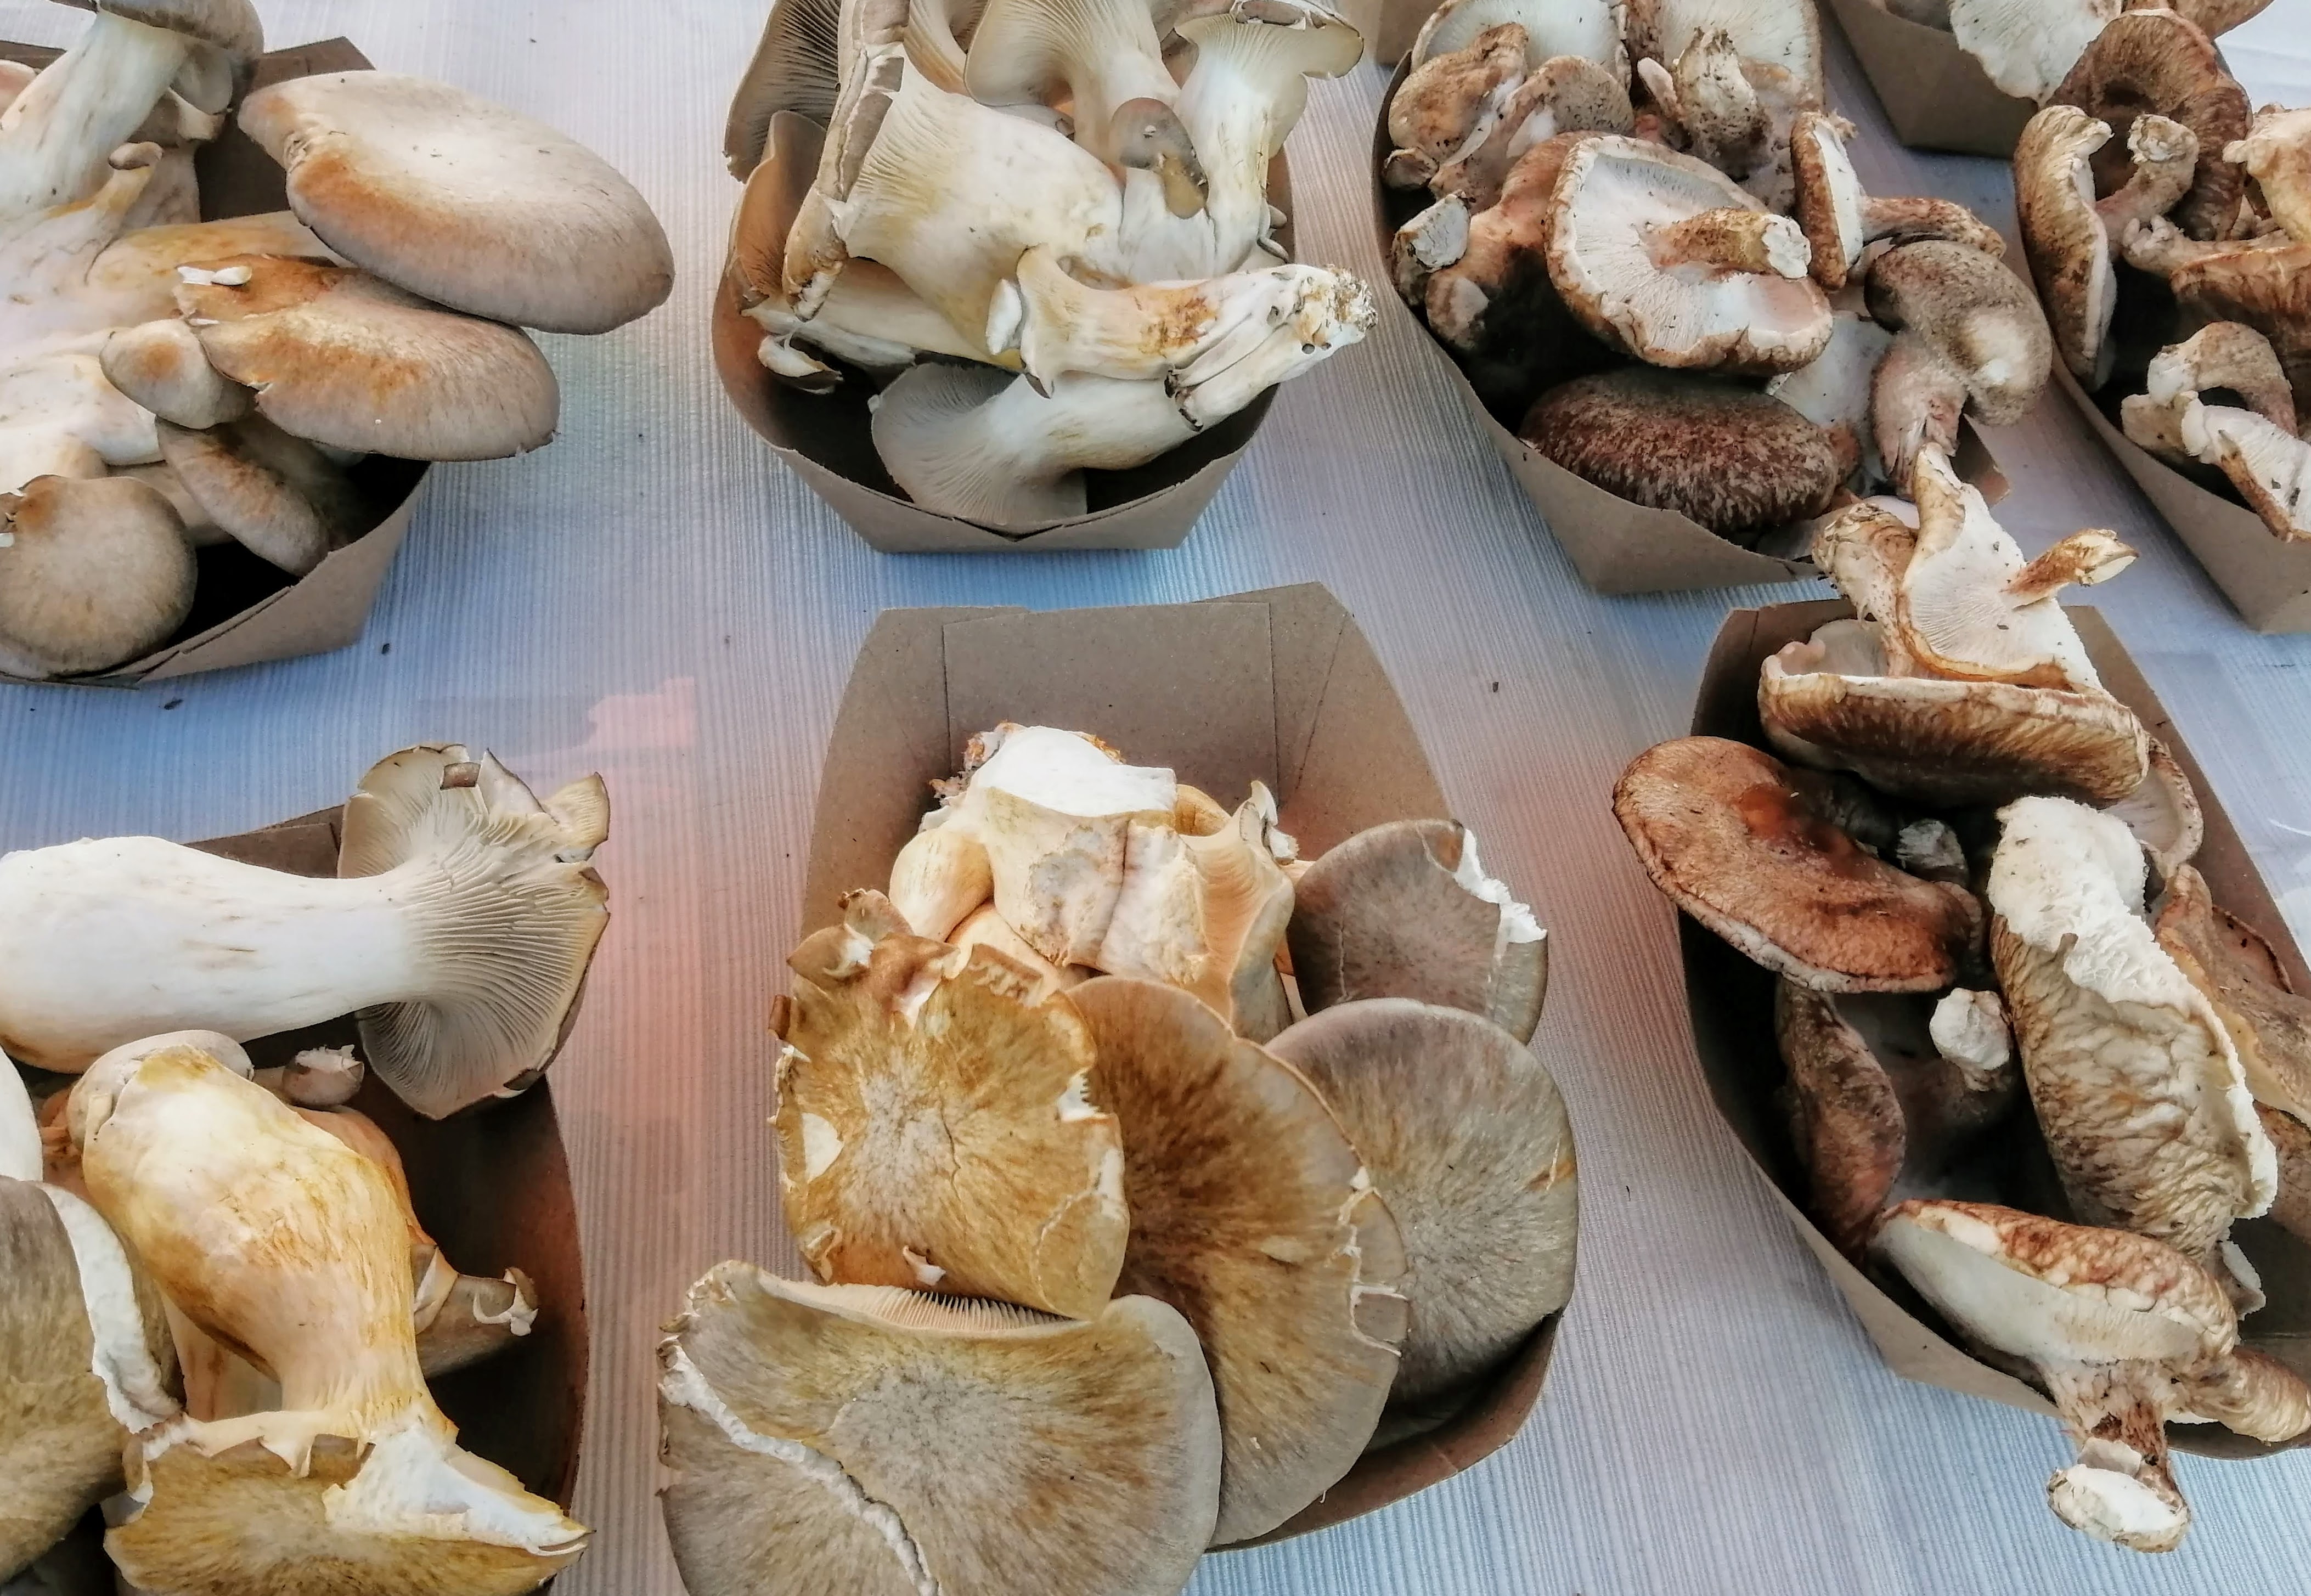 Many packages of exotic-looking mushrooms on a white table. Photo by Paul Young.